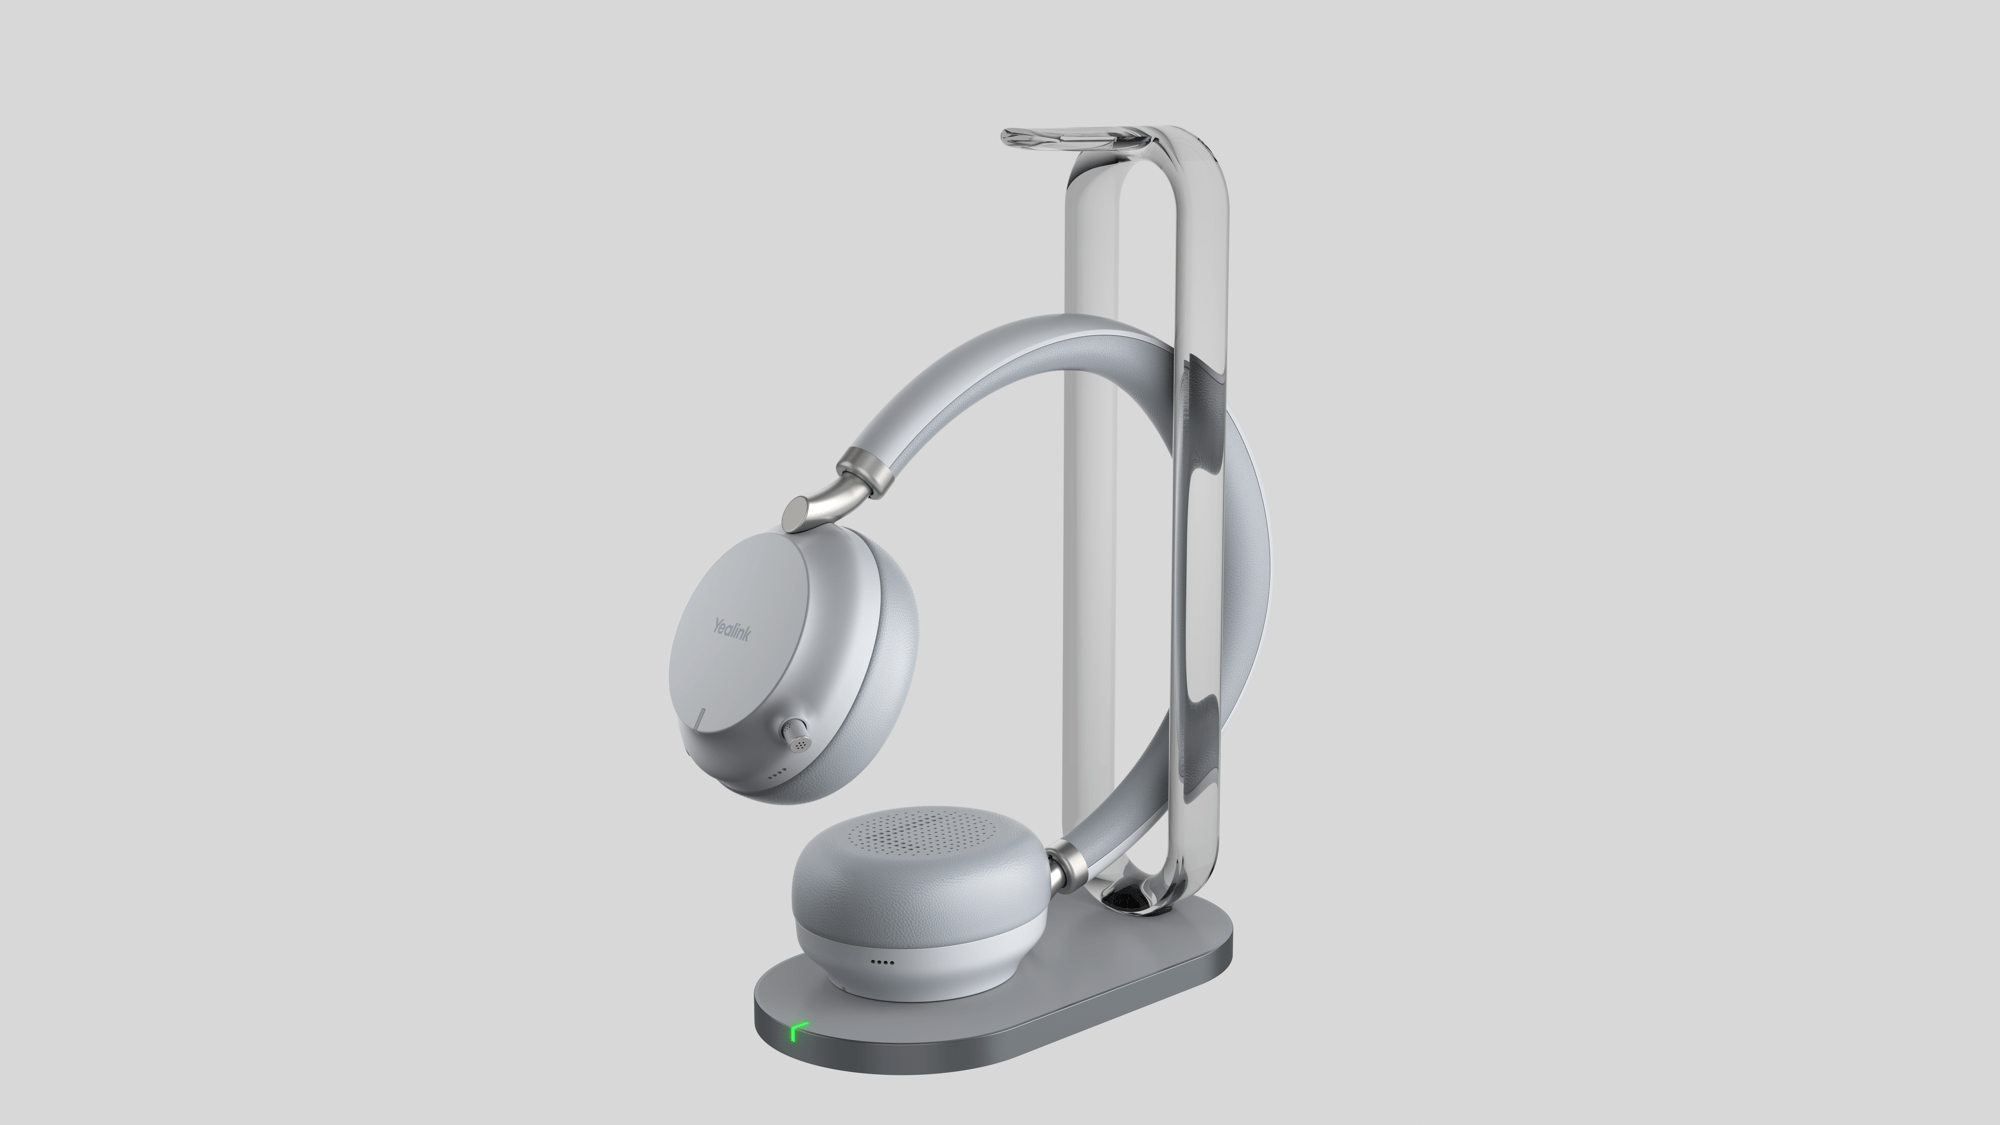 Yealink BH72 Bluetooth Wireless Headset with Charging Stand